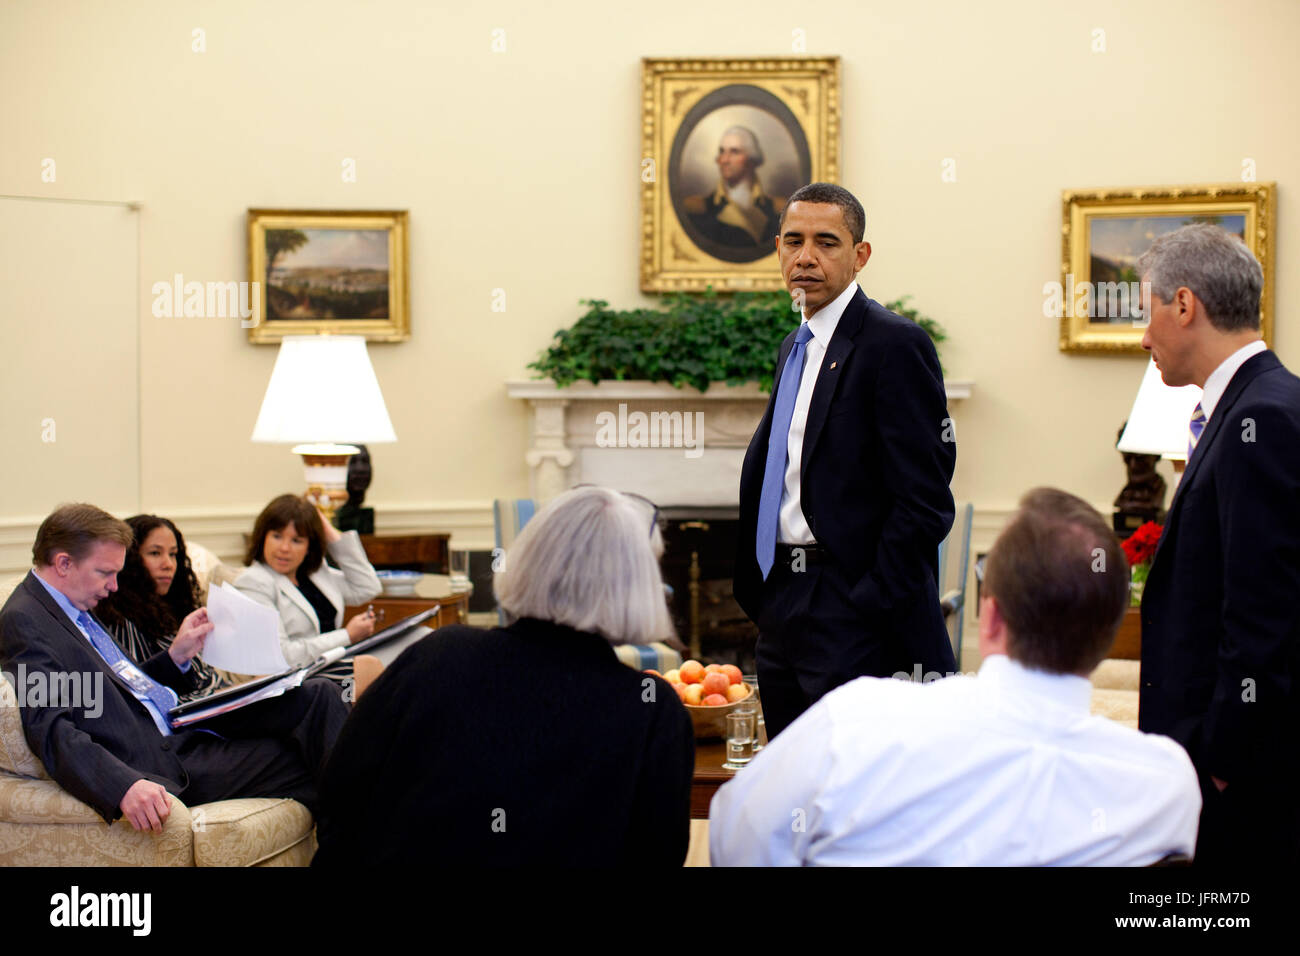 President Barack Obama at a senior advisors meeting in the Oval Office at the White House May 11, 2009. Official White House Photo by Pete Souza.  This official White House photograph is being made available for publication by news organizations and/or for personal use printing by the subject(s) of the photograph. The photograph may not be manipulated or used in materials, advertisements, products, or promotions that in any way suggest approval or endorsement of the President, the First Family, or the White House. Stock Photo